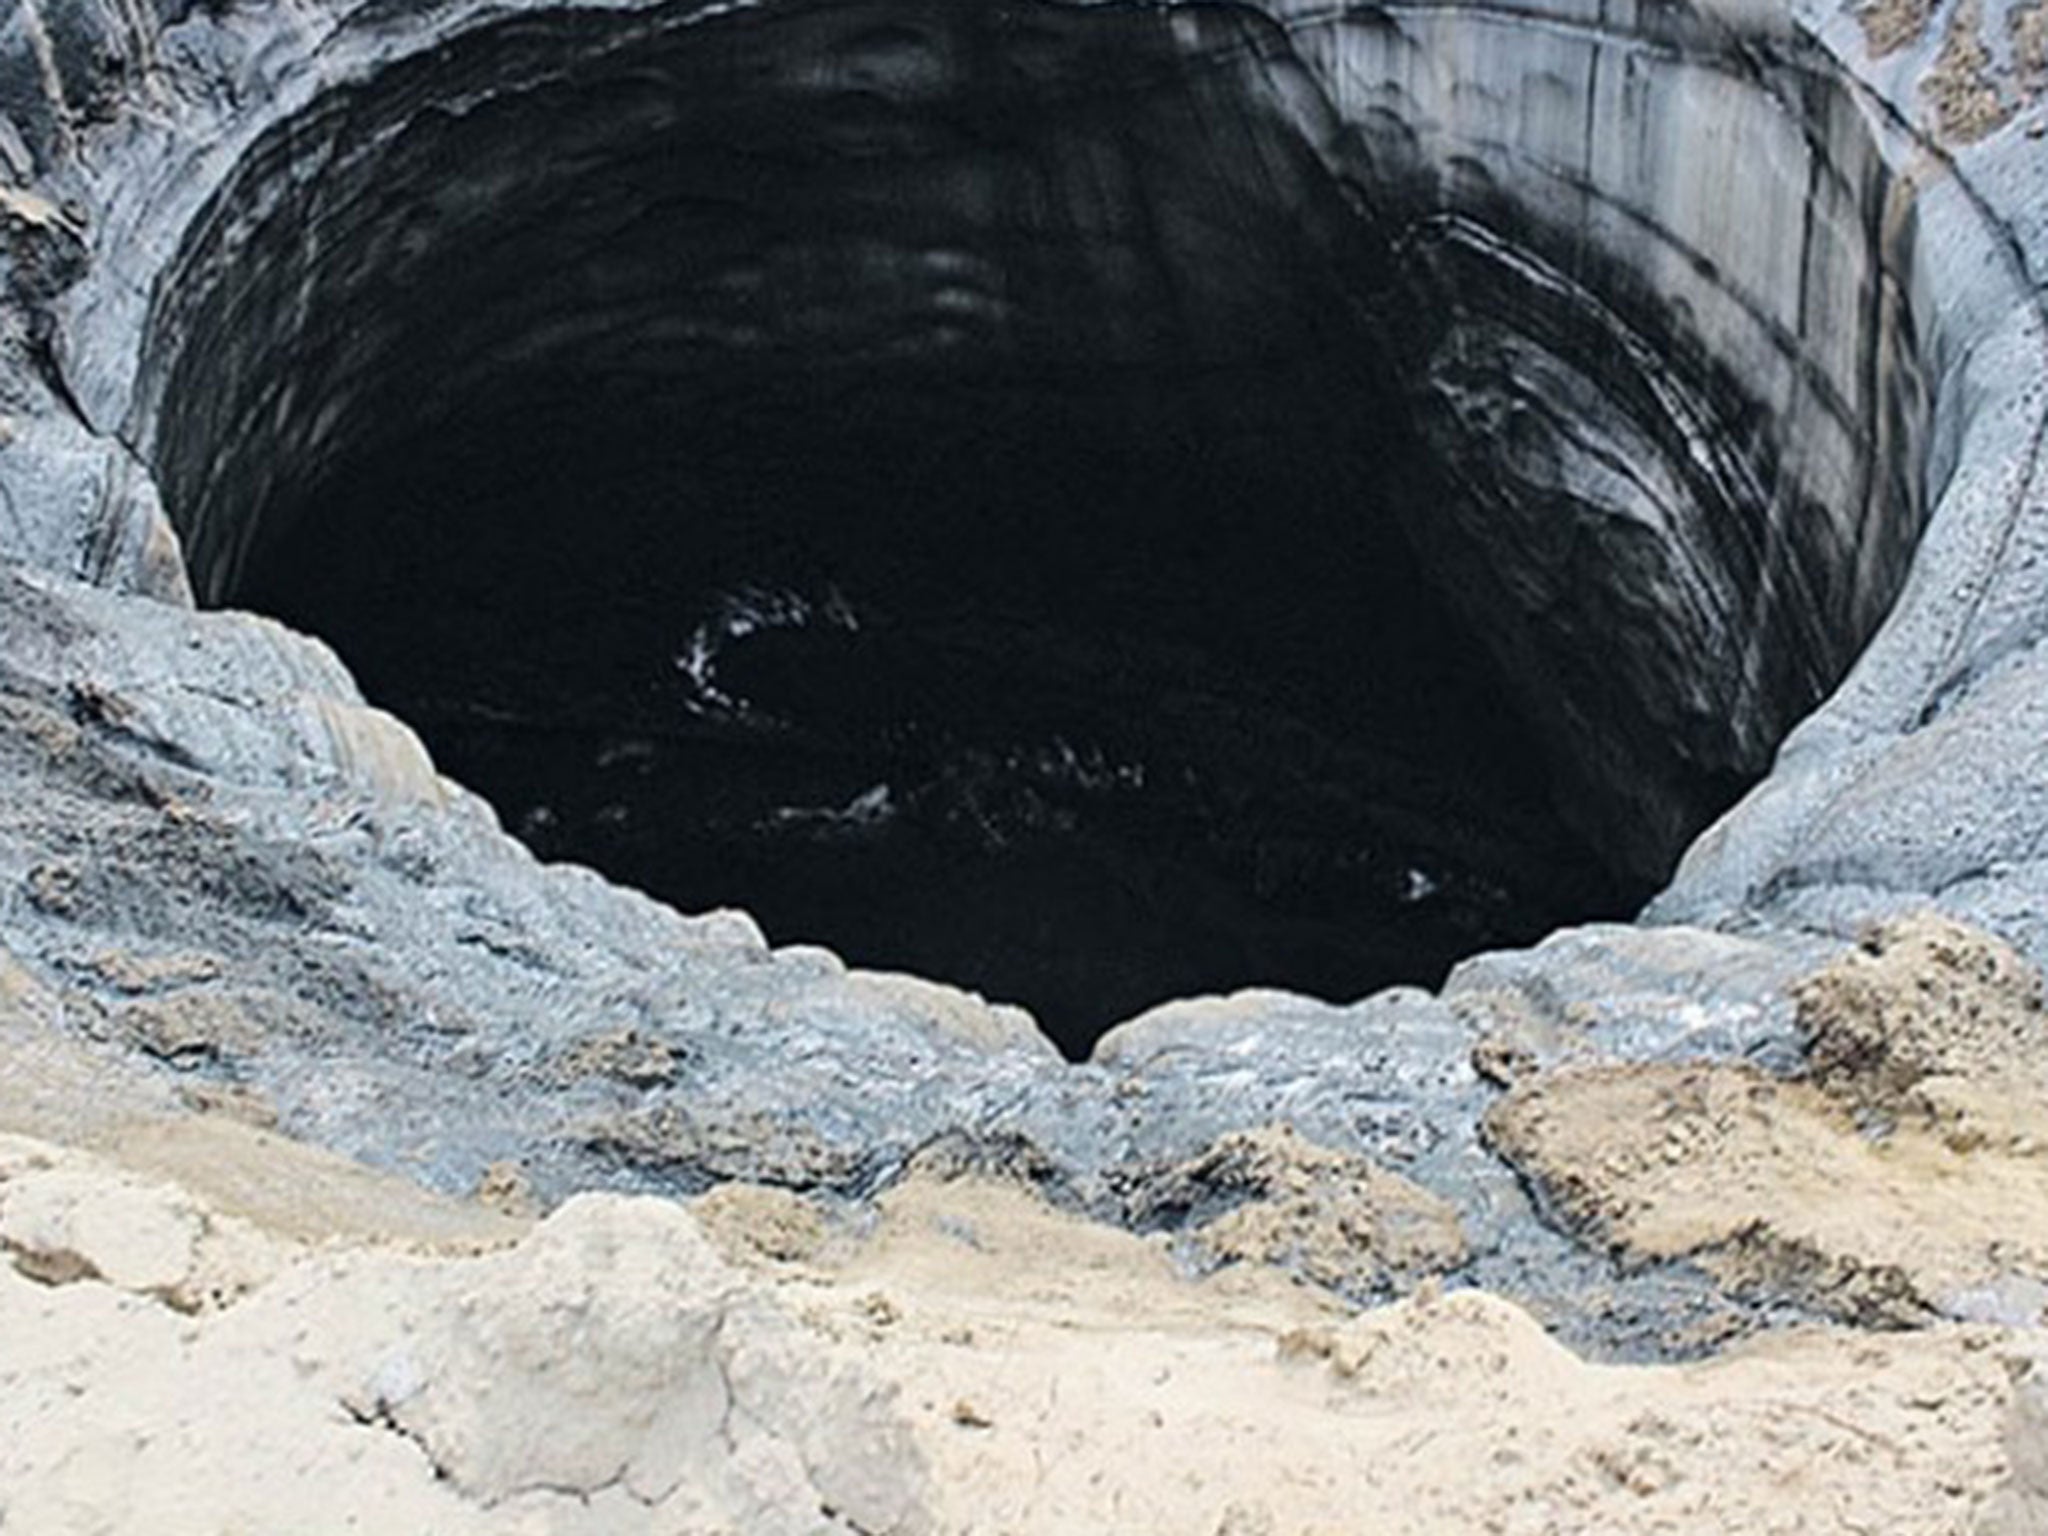 A picture The Siberian Times claims shows a 15 metre crater in the Taz district, near the village of Antipayuta